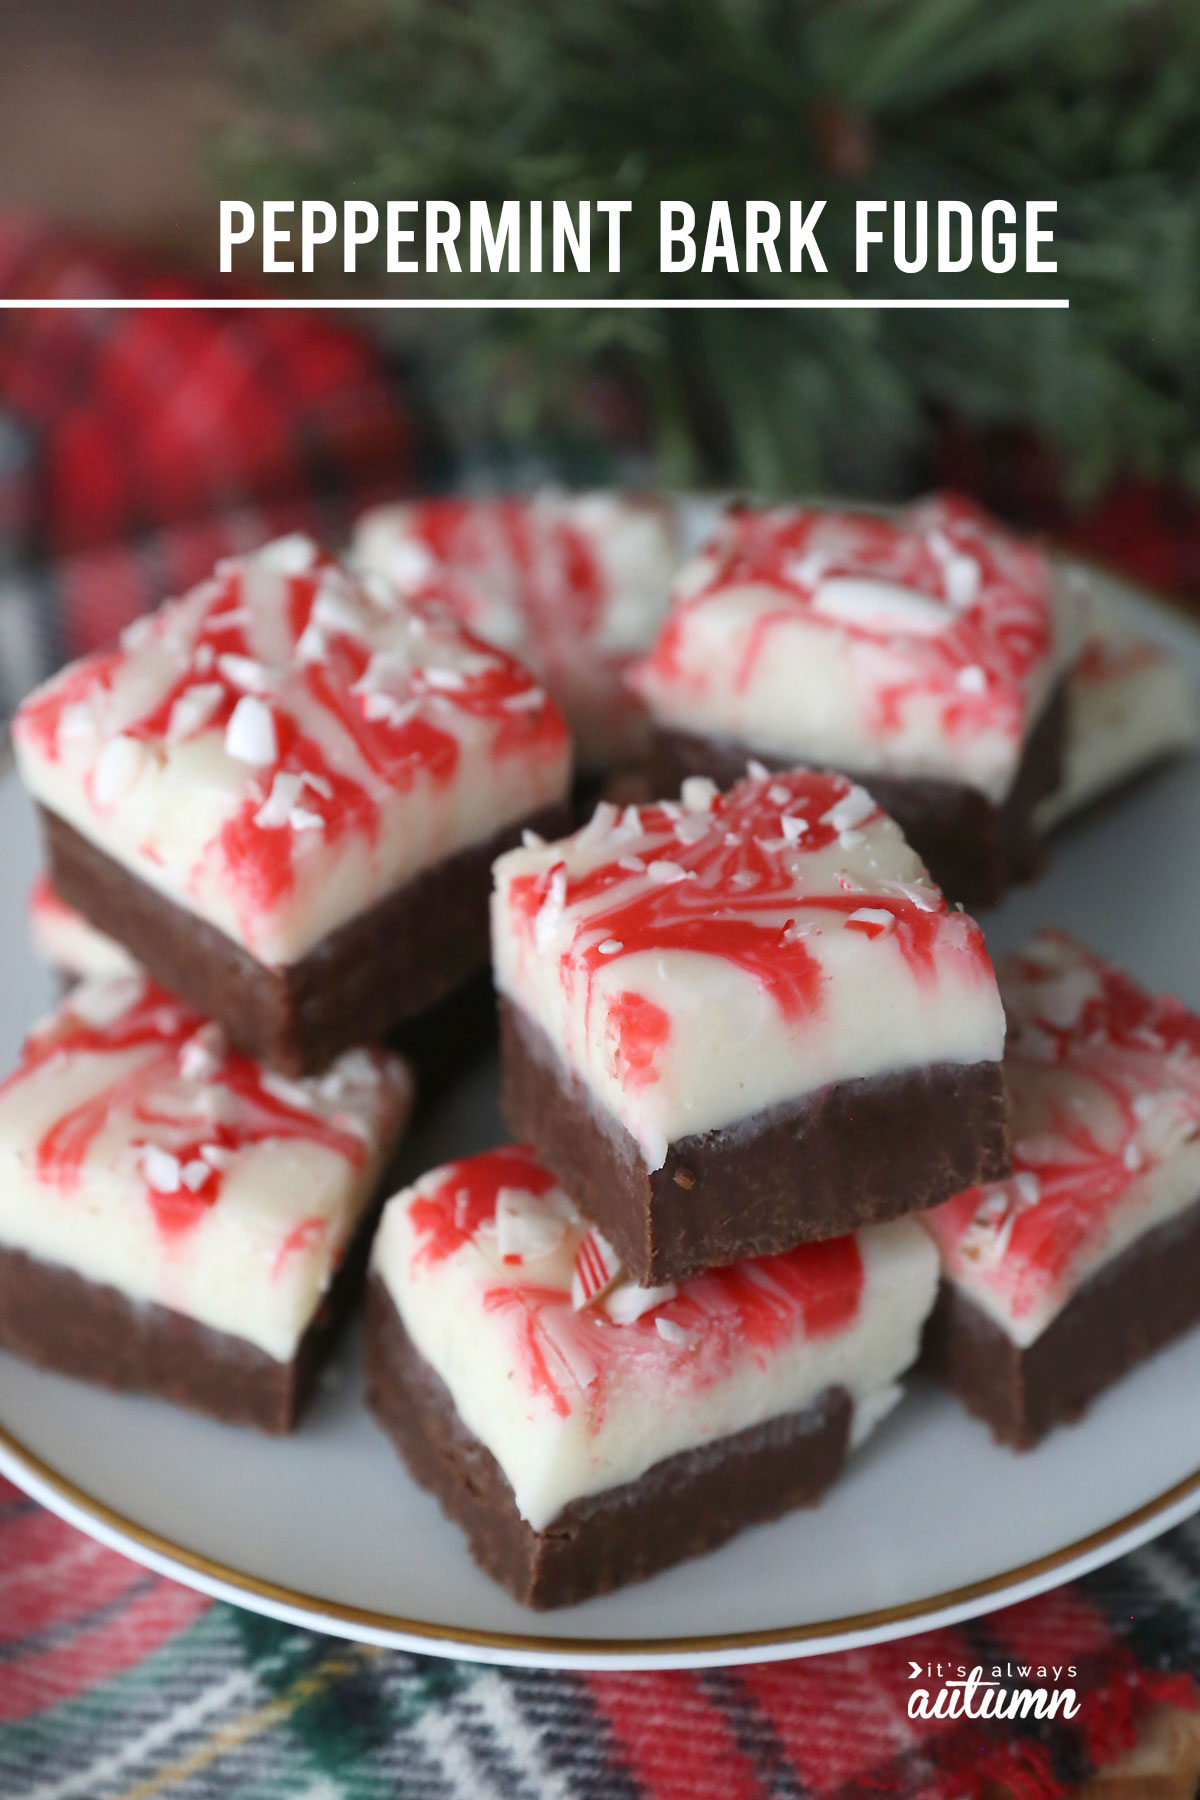 You can make this delicious peppermint bark fudge in the microwave! It's easy and delicious.